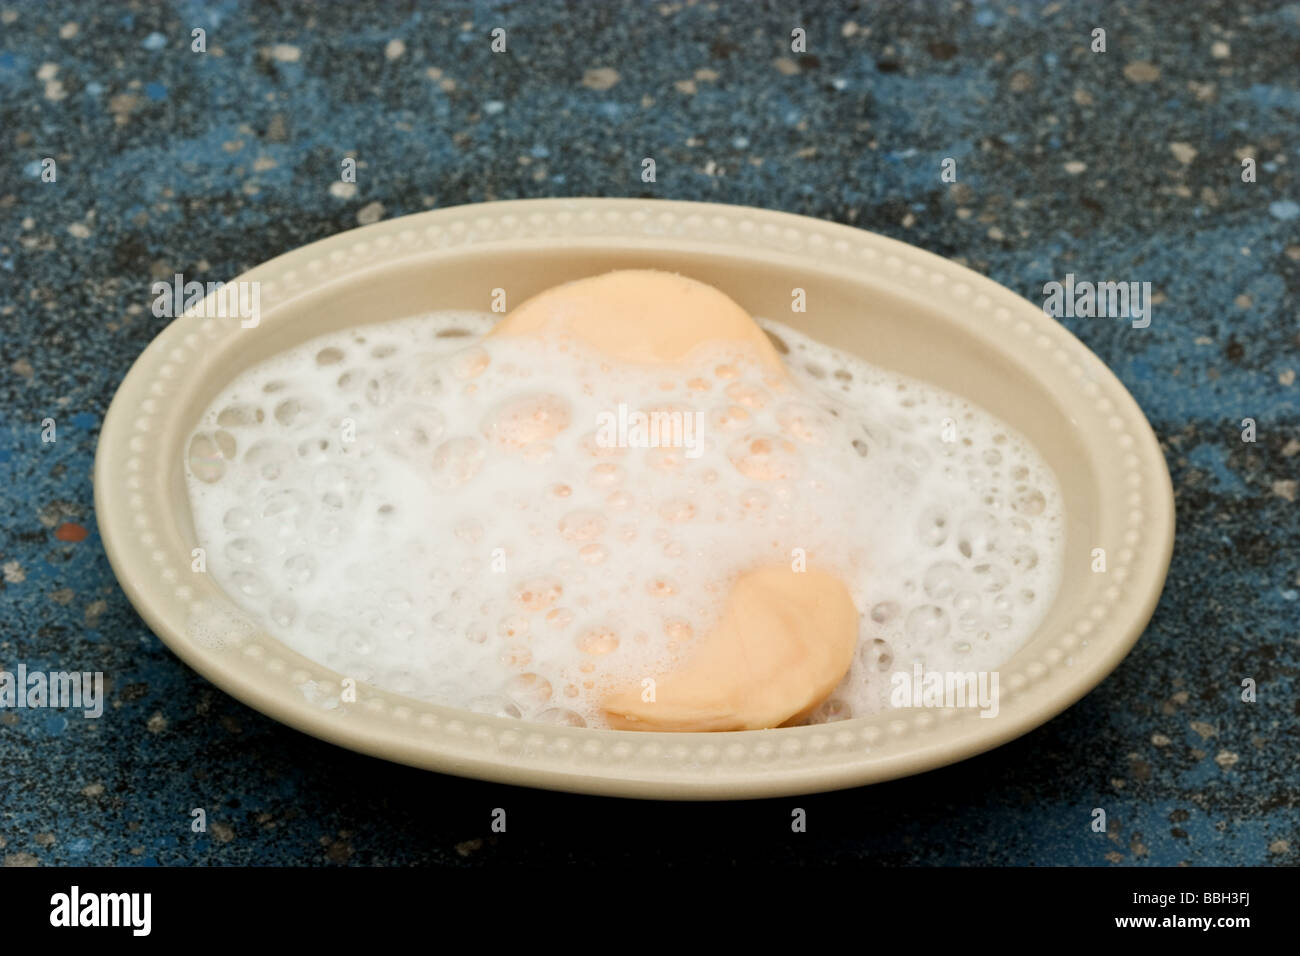 Lathered soap bar in a soap dish Stock Photo